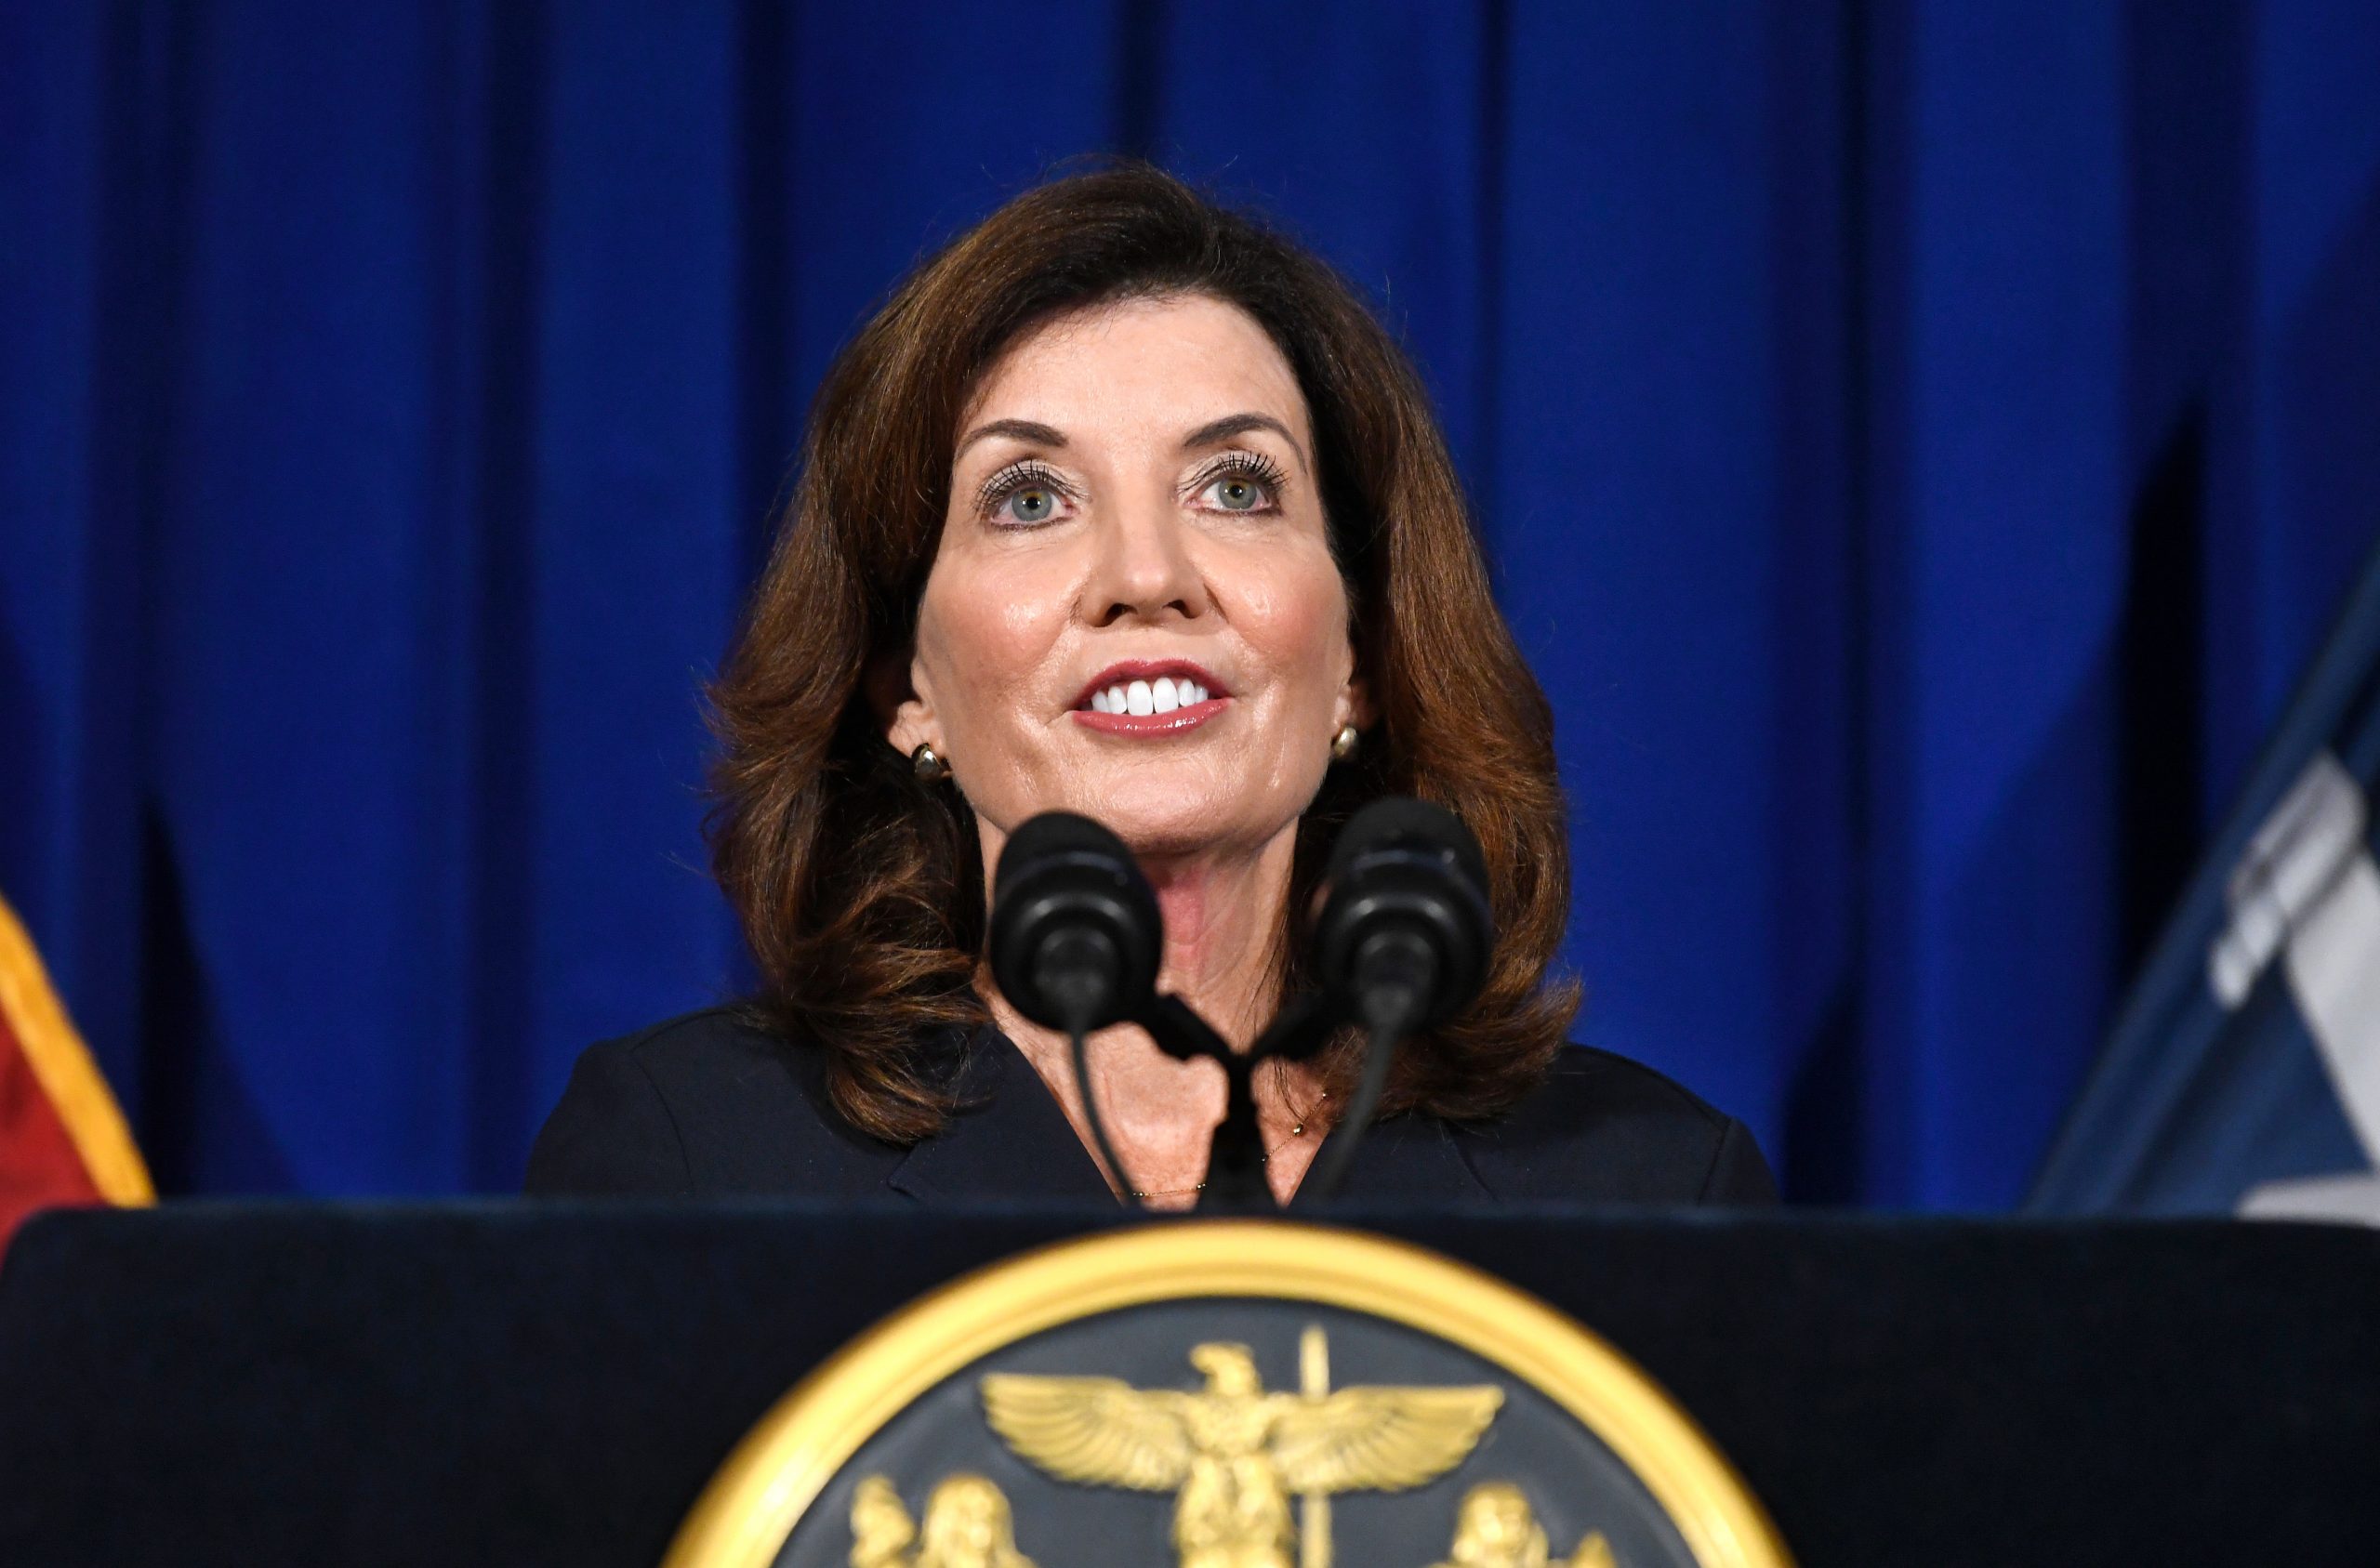 New York Gov. Kathy Hochul adds 12,000 deaths to Andrew Cuomo’s COVID tally